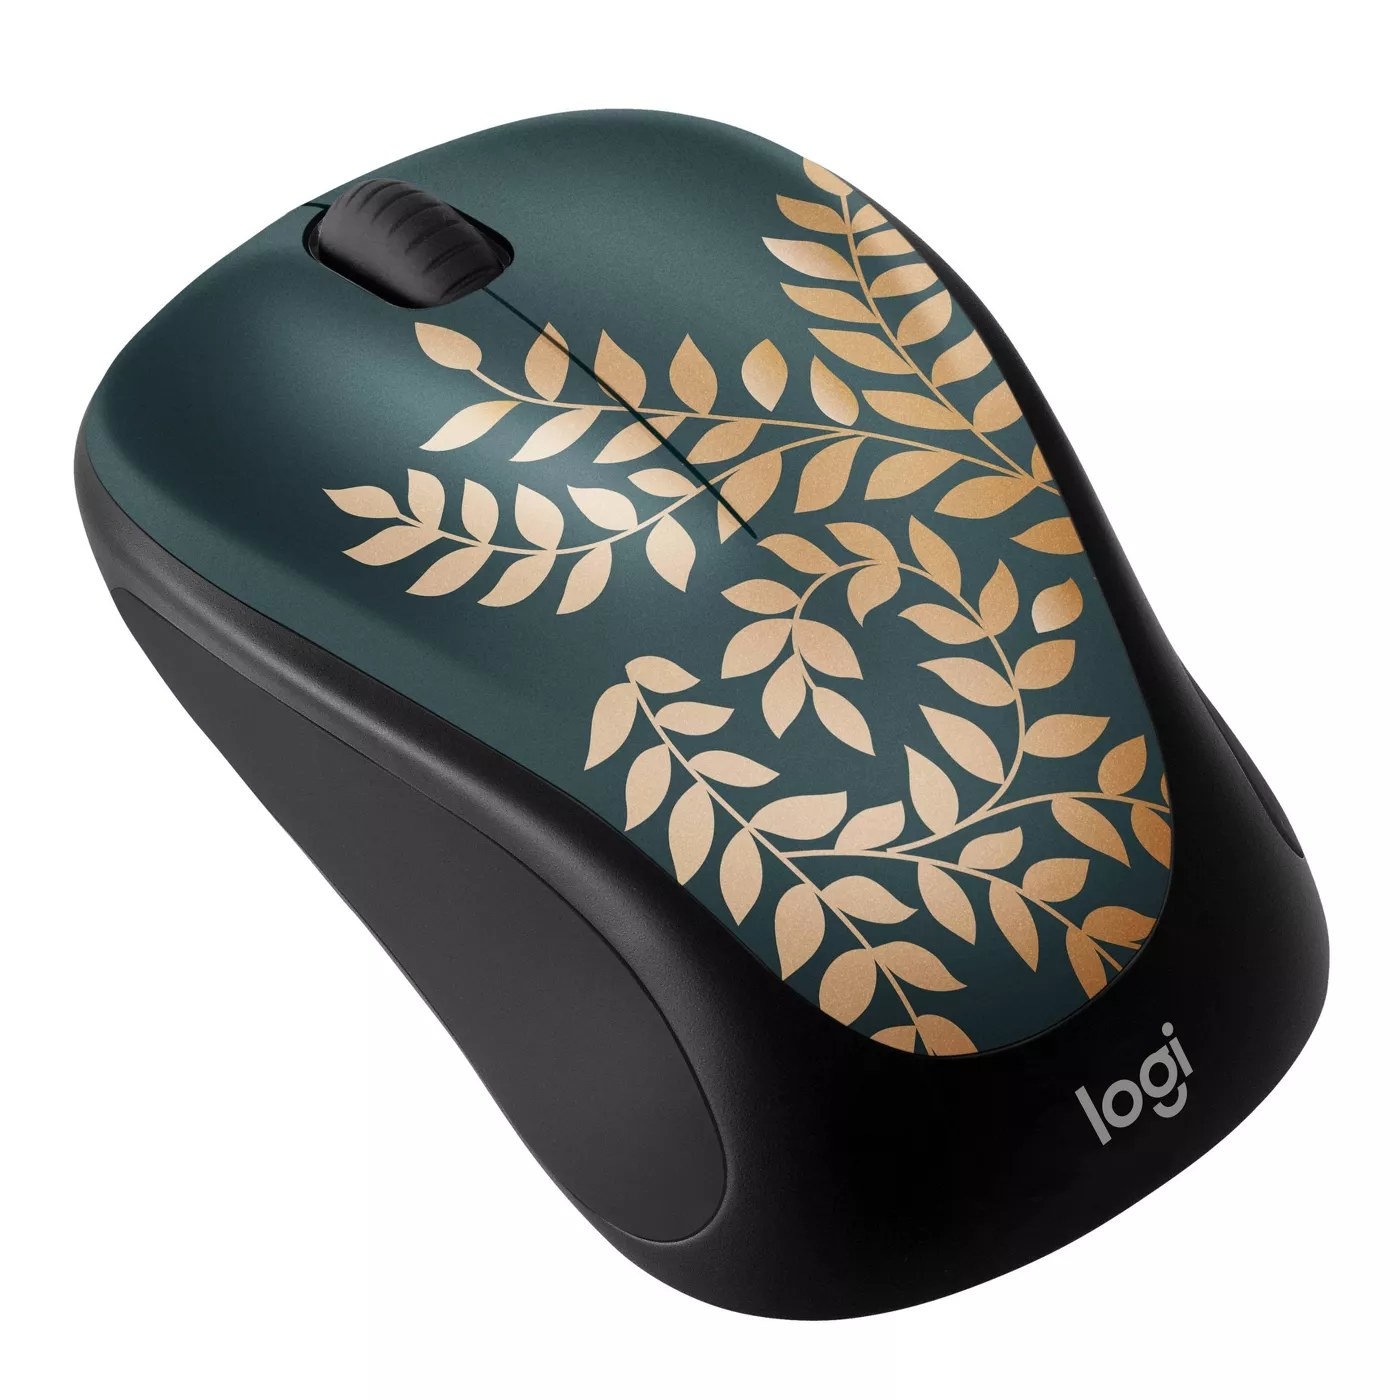 The turquoise and black Logitech mouse with gold leaves